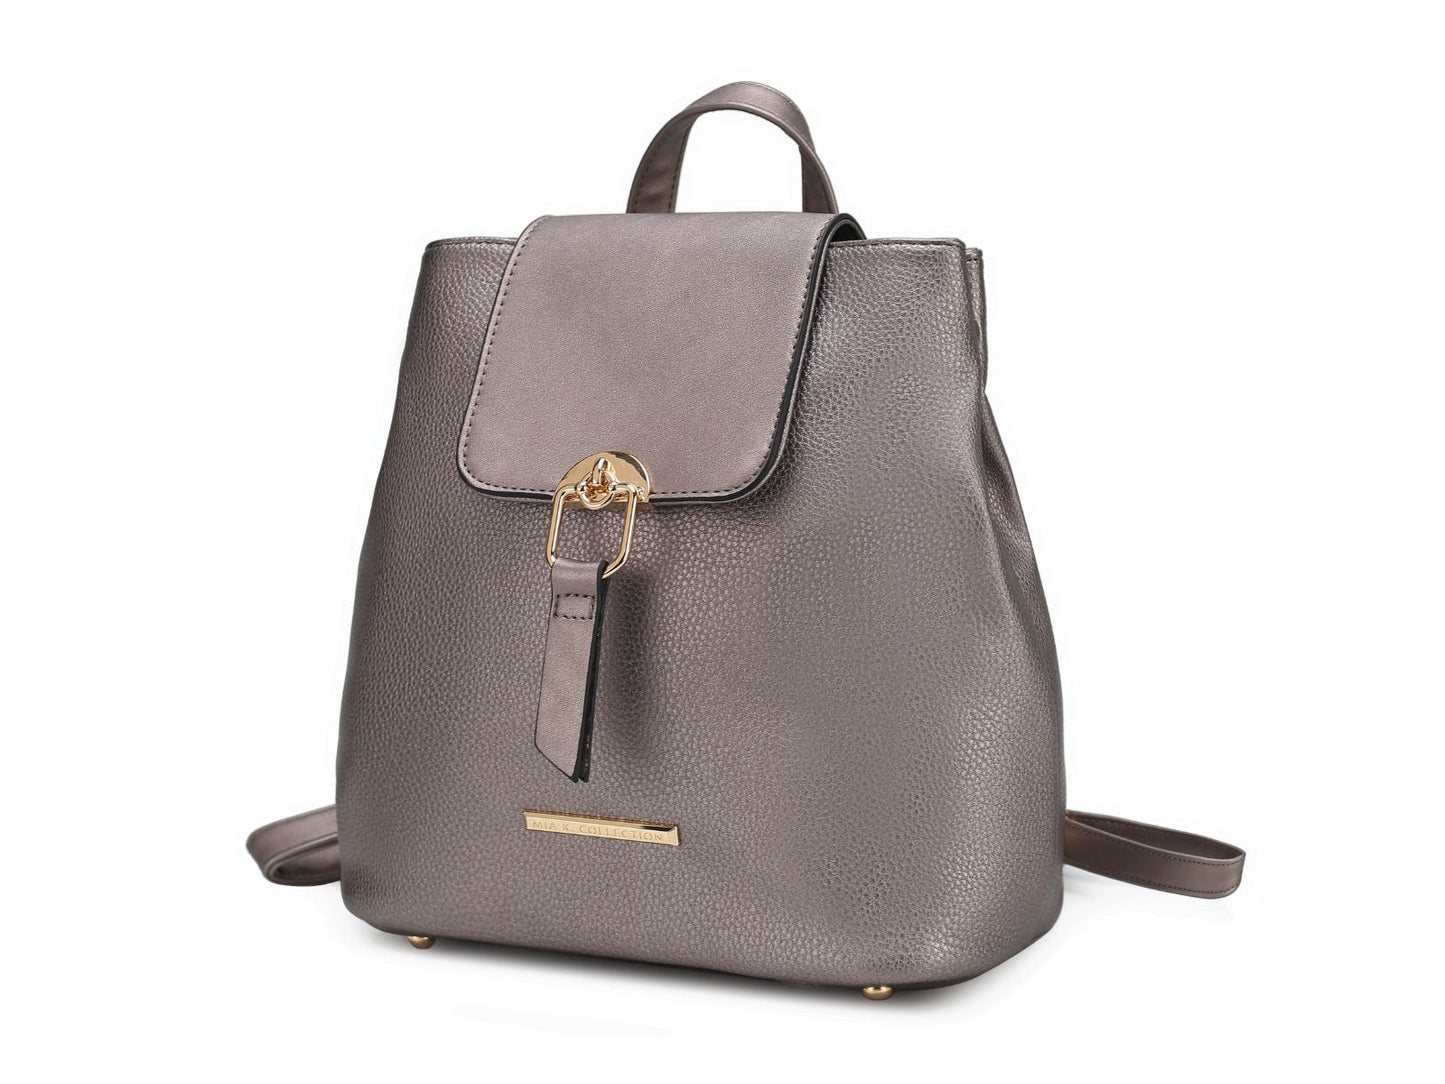 MKF Collection Ingrid Vegan Leather Women's Convertible Backpack by Mia k